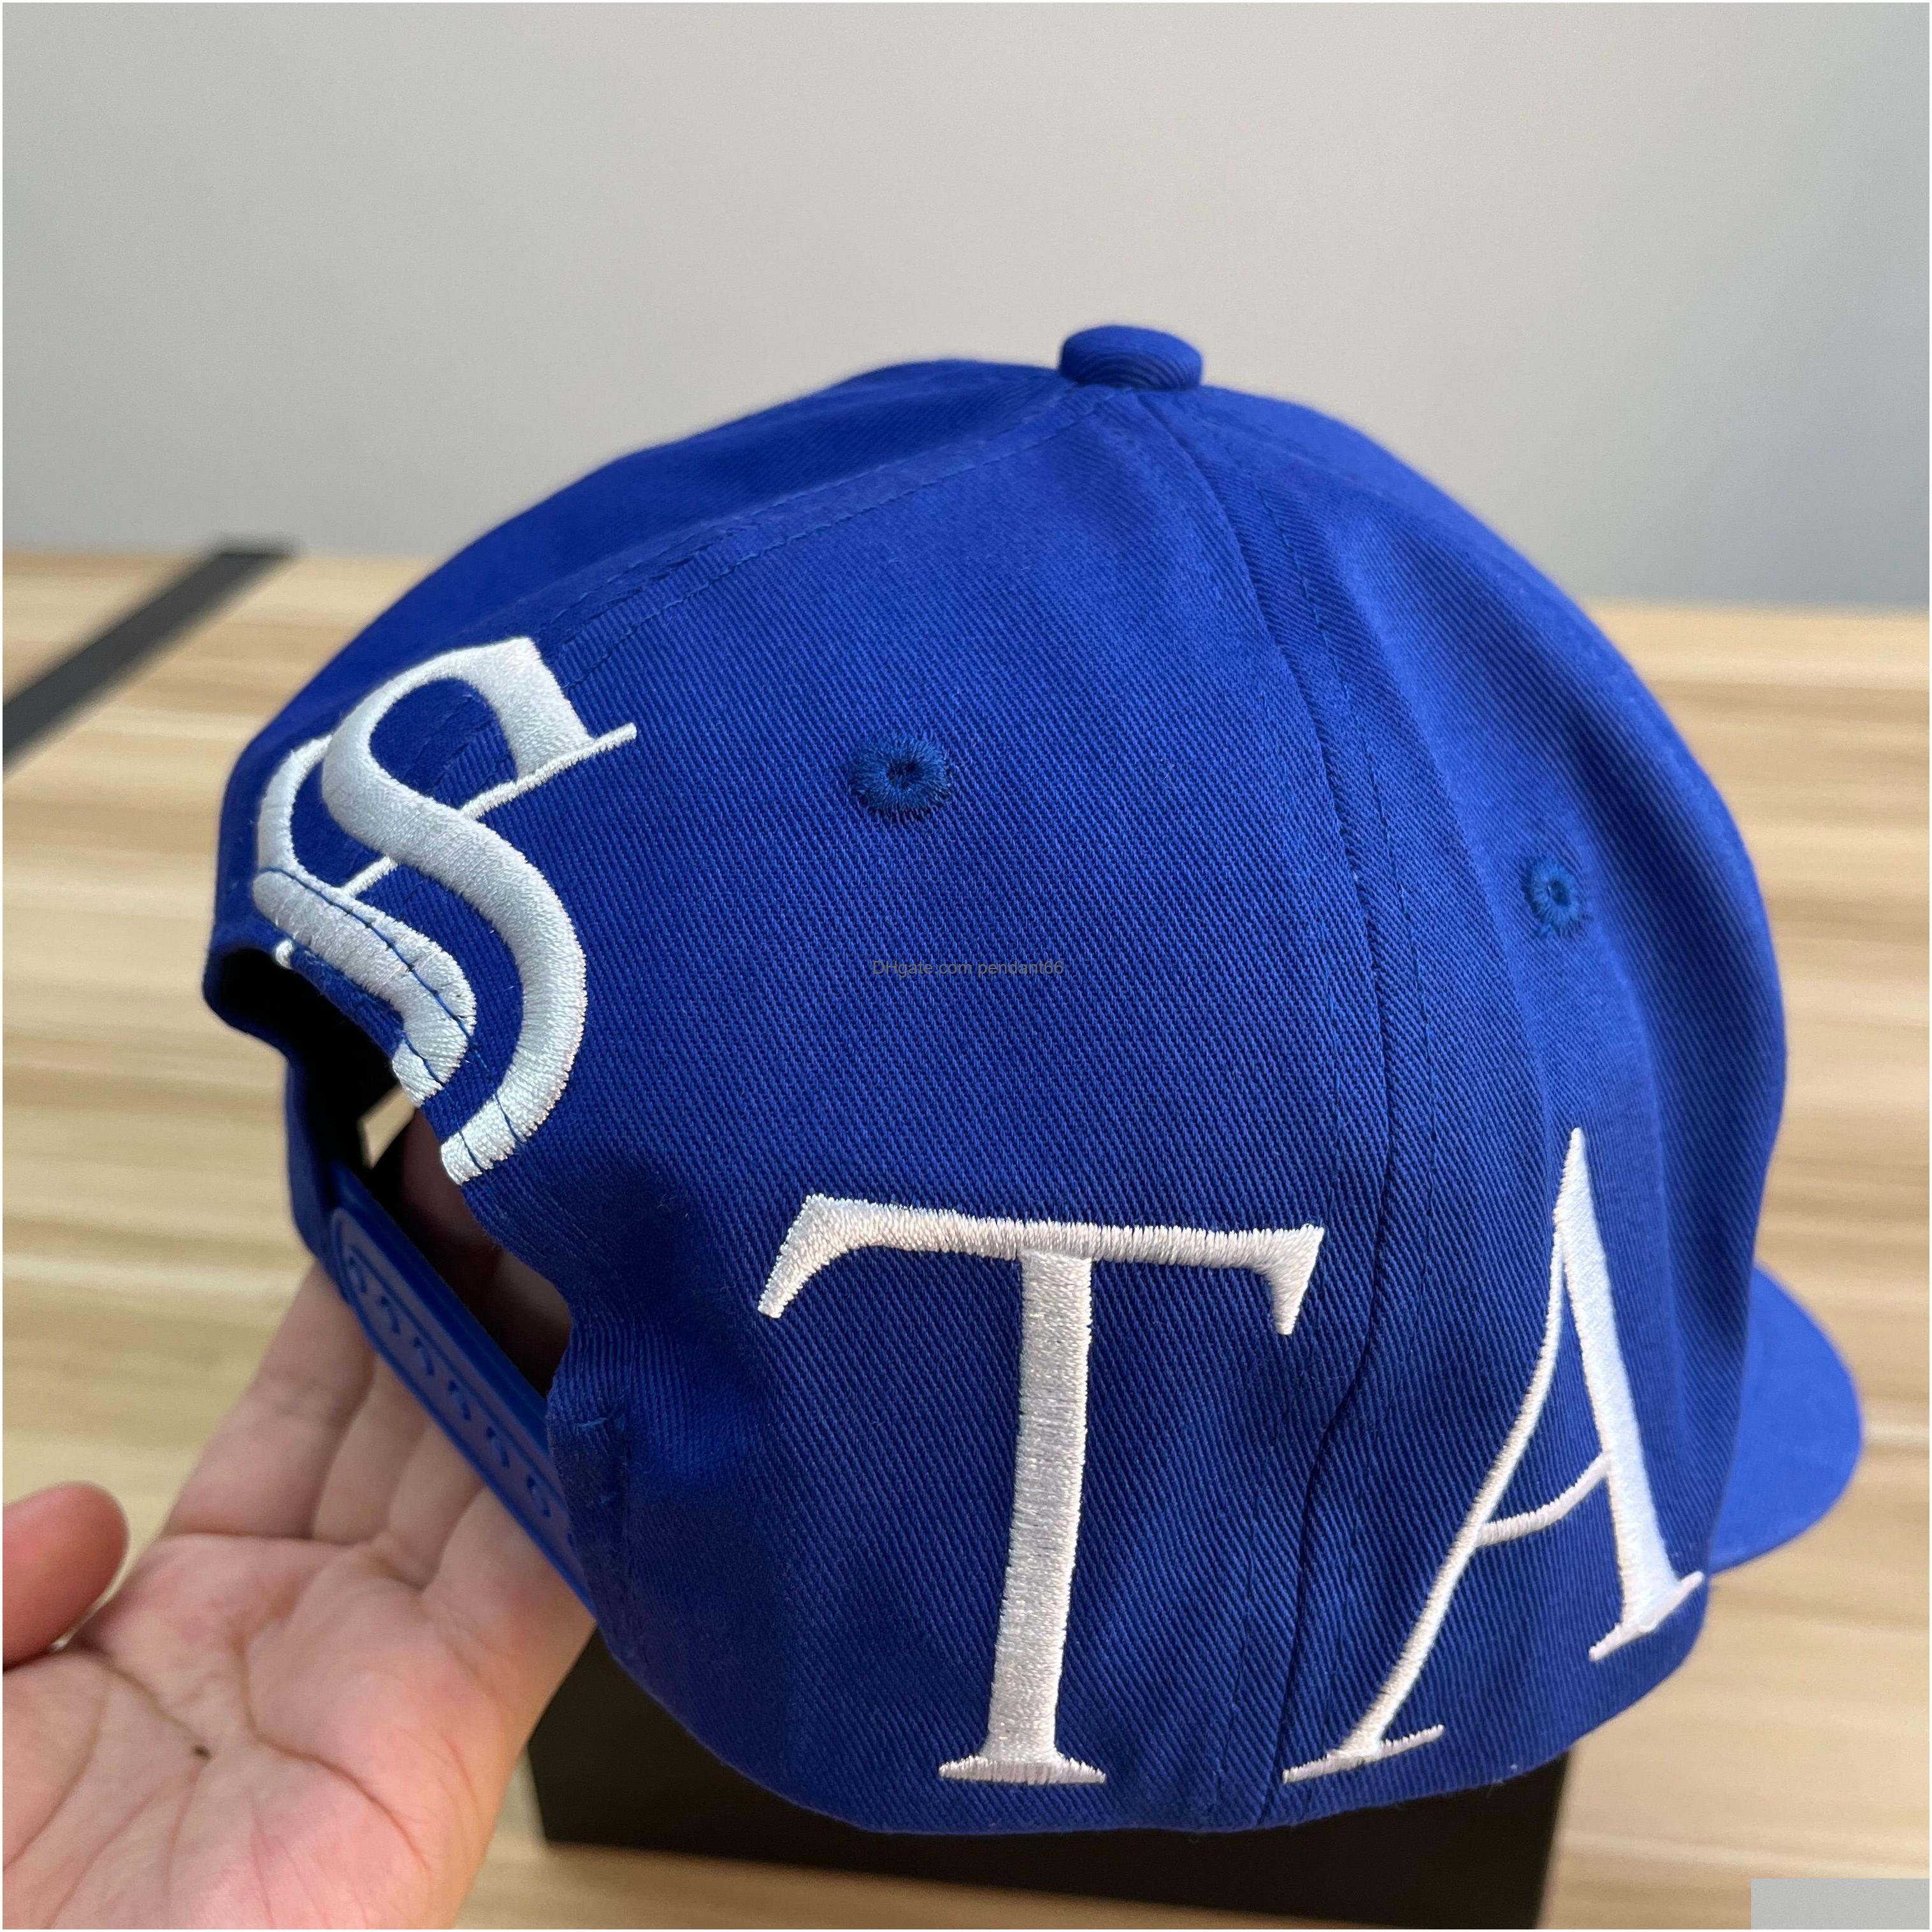 

Ball Caps Couple Trapstar Designer Baseball Cap Sporty Lettering Embroidery Casquette Fashion Accessories Hats Scarves, Blue